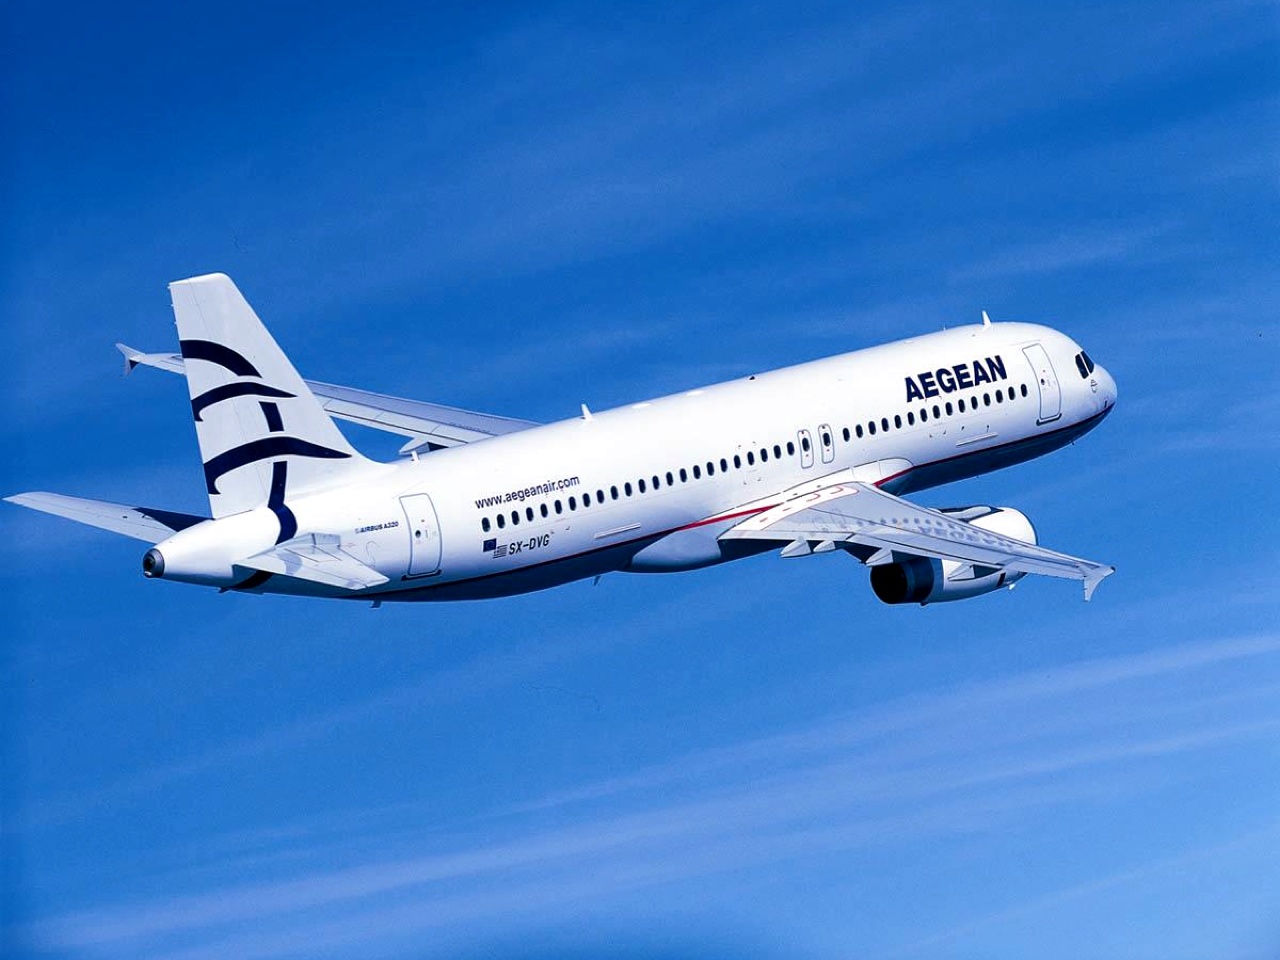 AEGEAN Provides An Easier Way To Manage Your Bookings